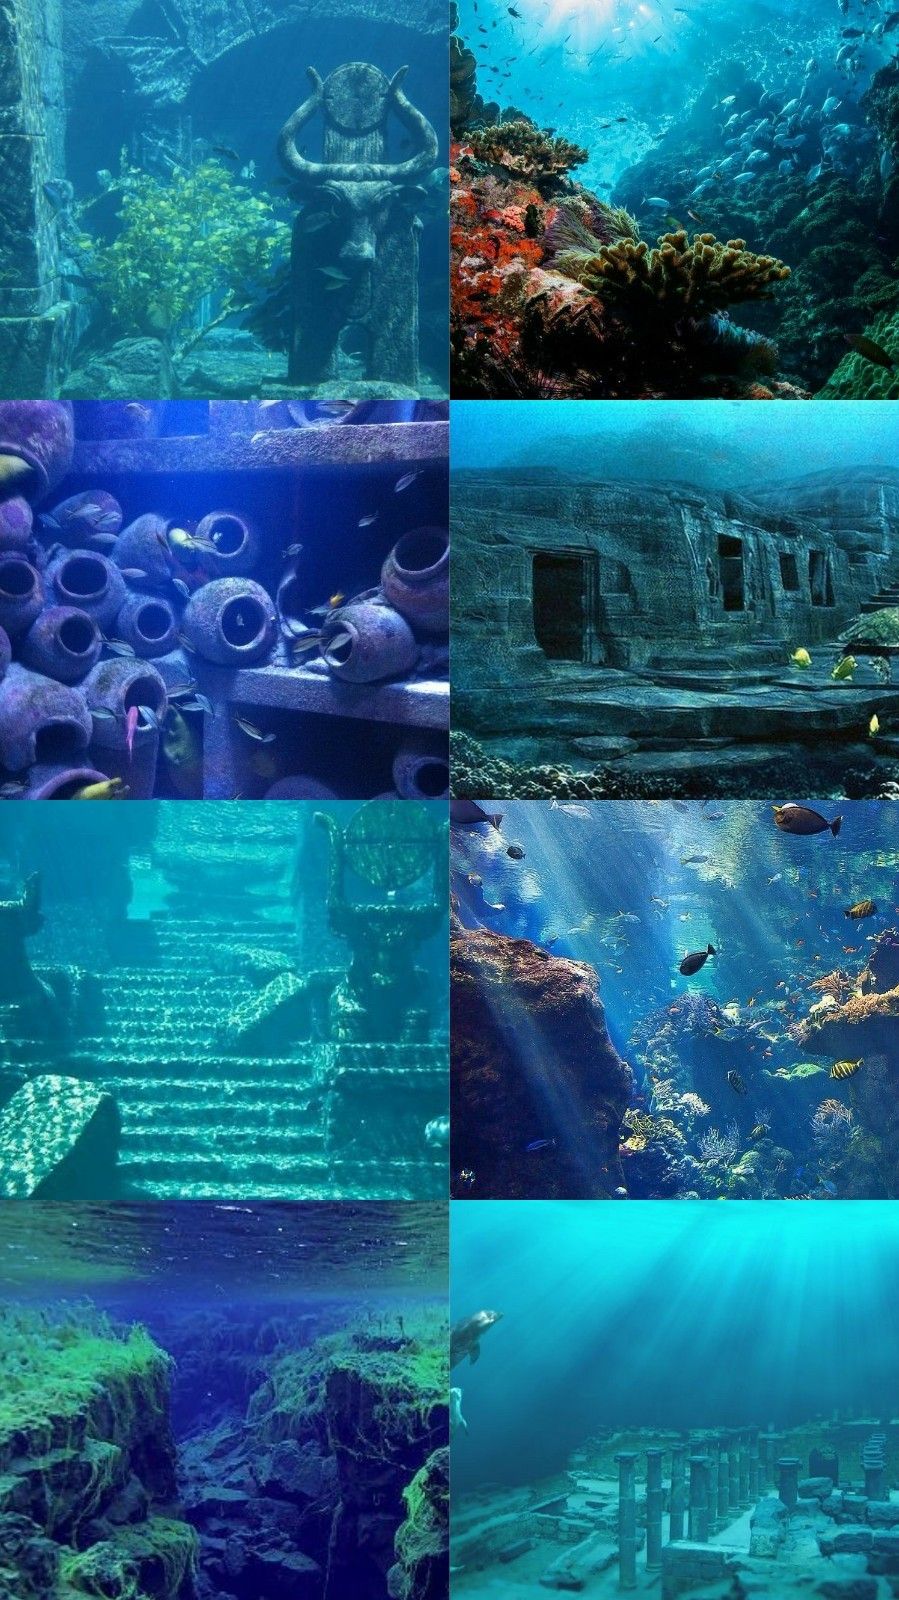 A collage of pictures showing different underwater scenes - Underwater